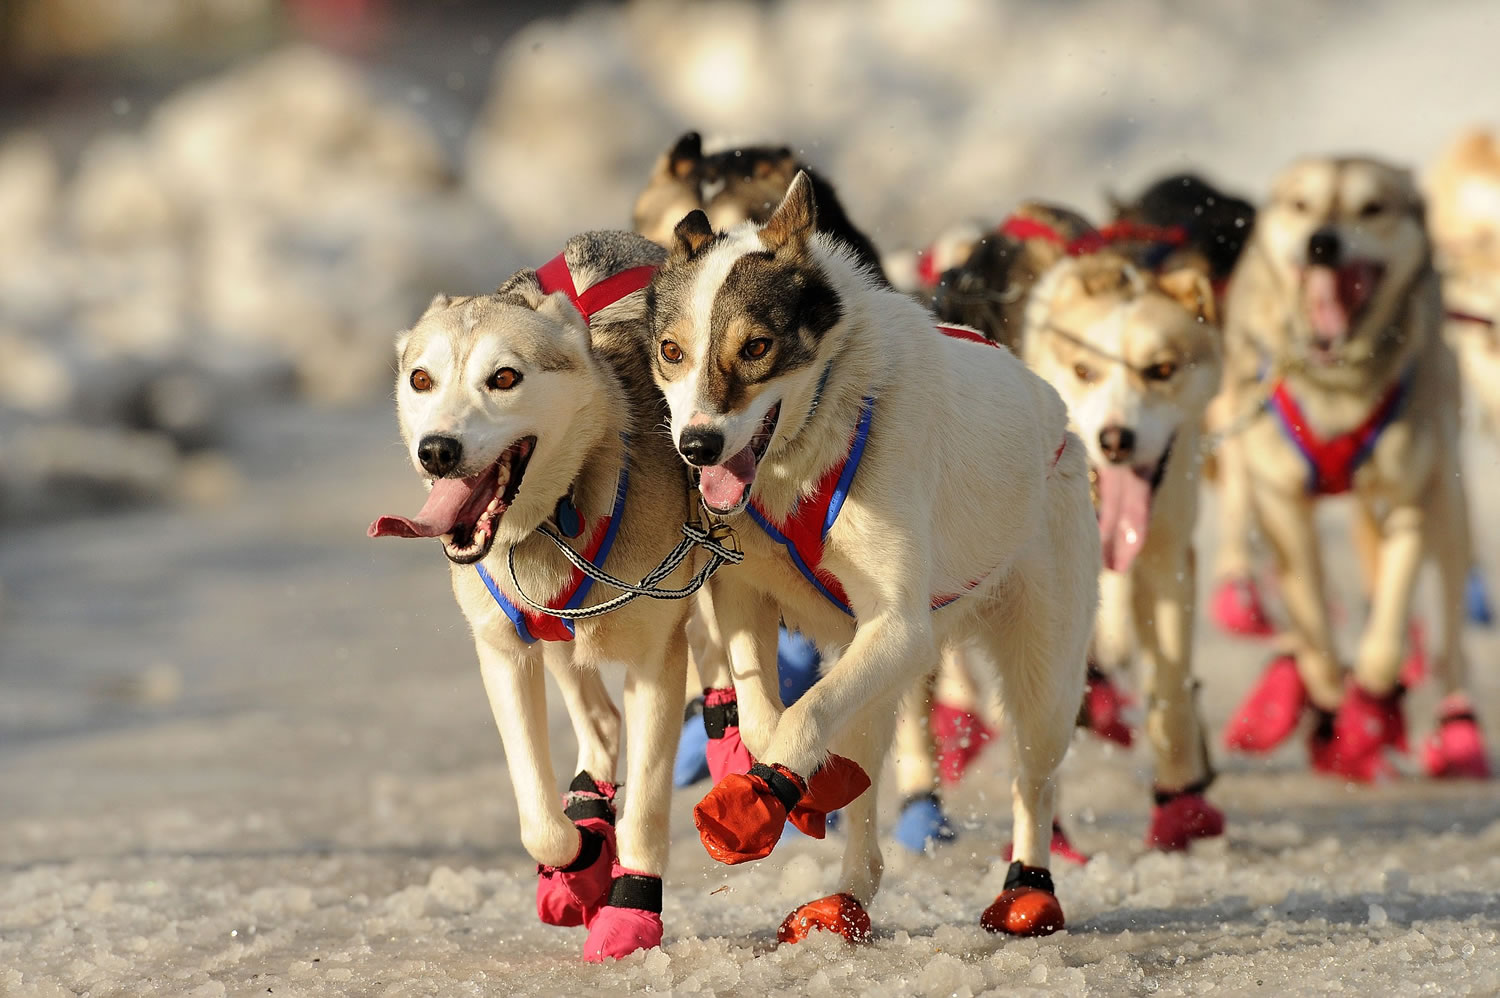 The sled dogs of rookie musher Alan Eischens, from Wasilla, Alaska, storm down 4th Avenue in Anchorage, Alaska, at the start of the 2015 Iditarod Sled Dog Race on Saturday.